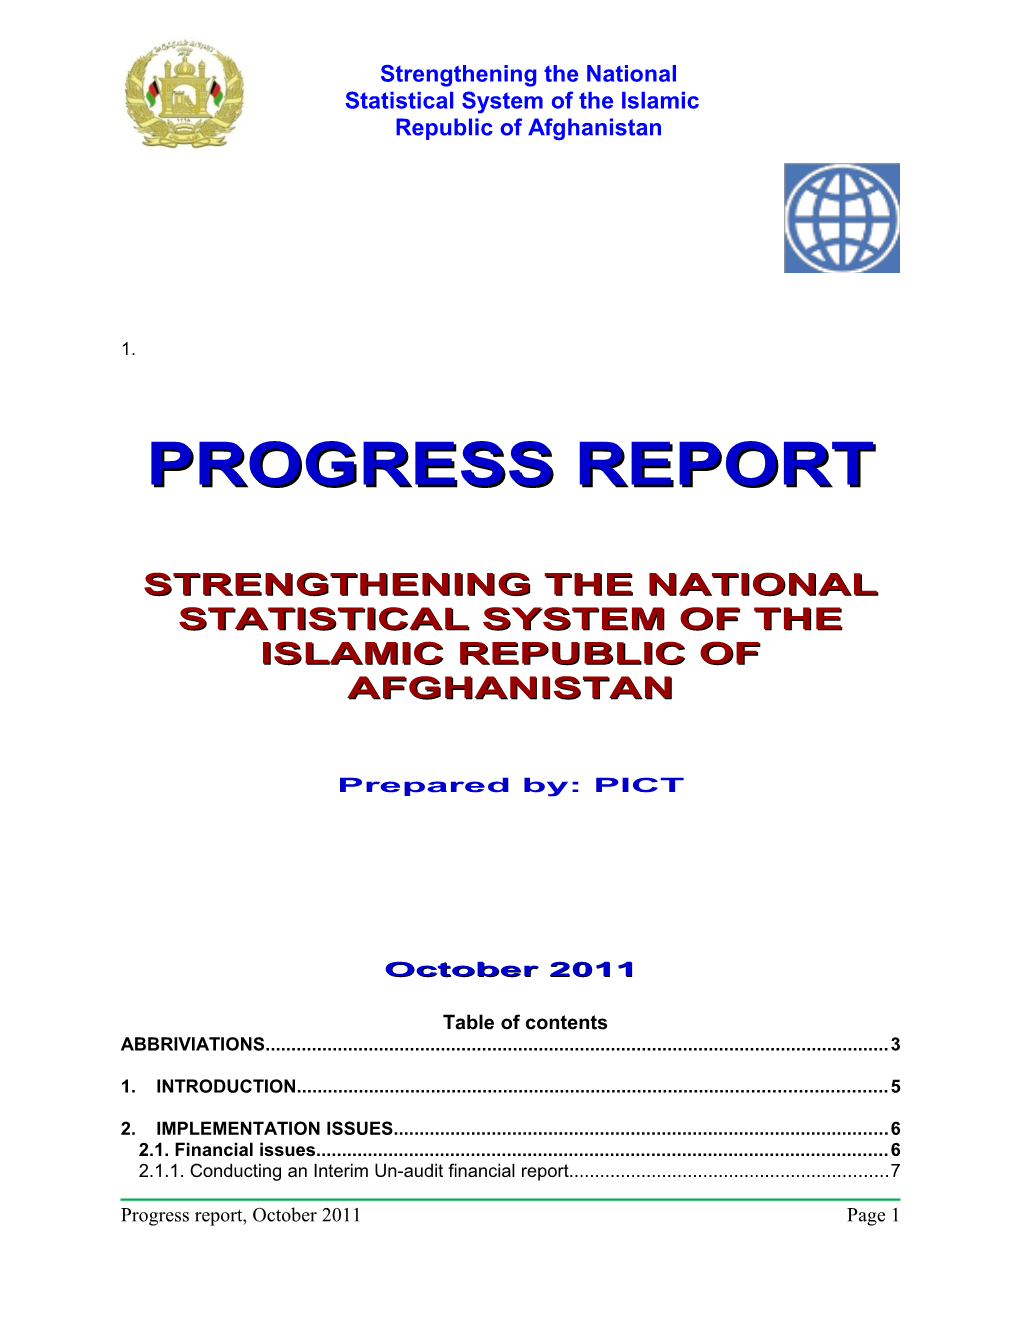 Statistical System of the Islamic Republic of Afghanistan